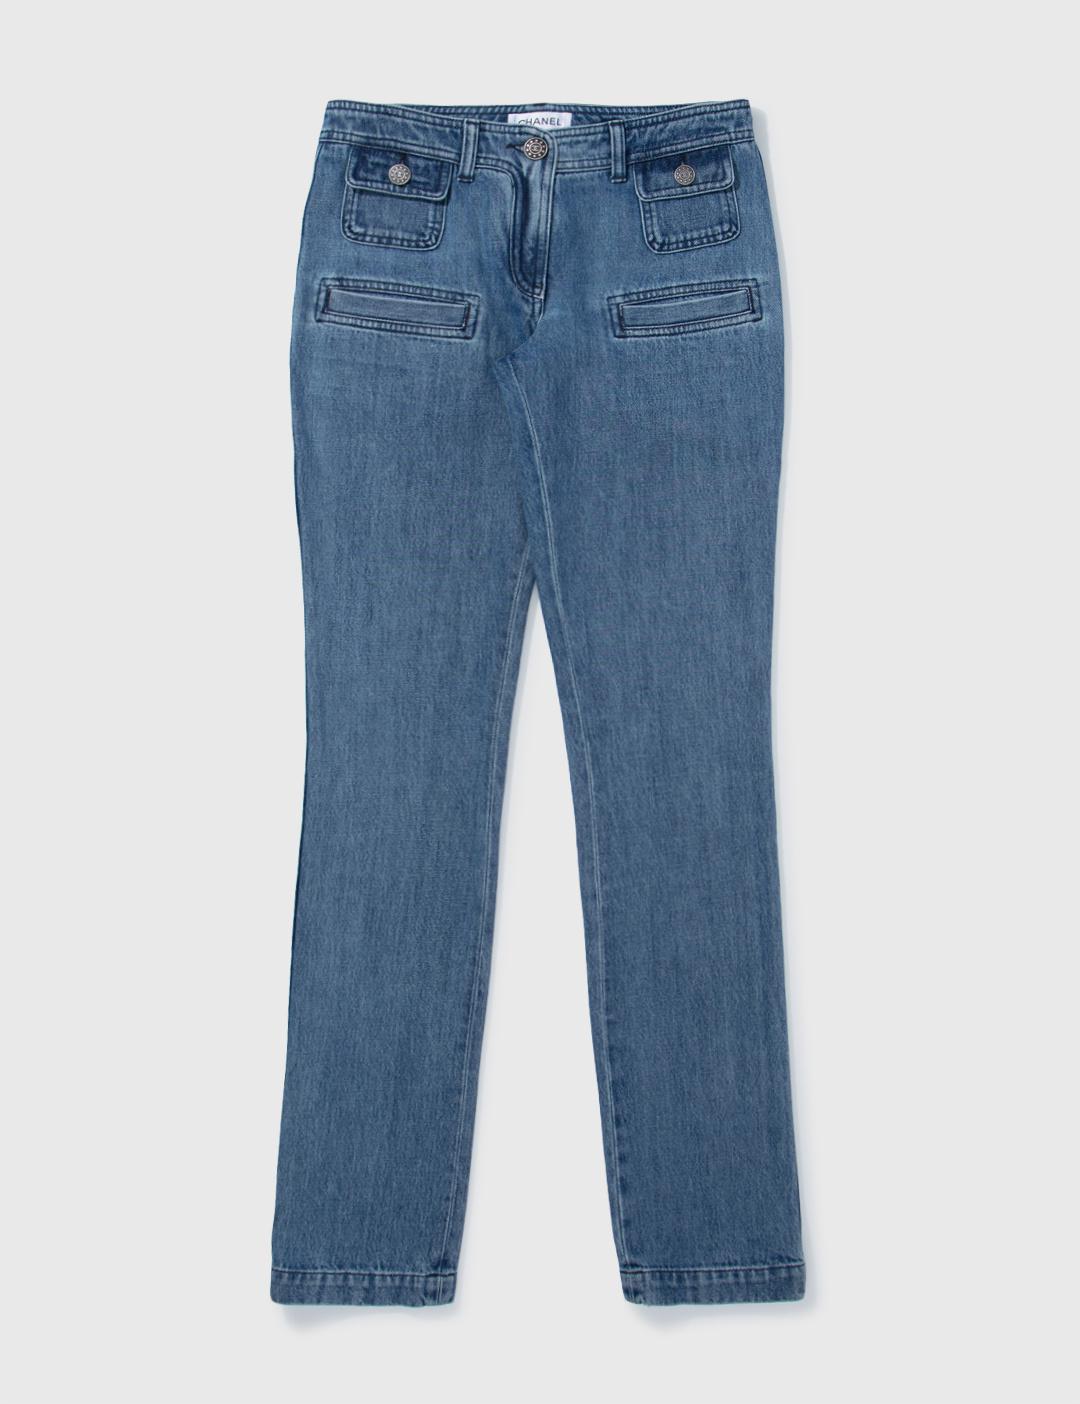 CHANEL REGULAR FIT JEANS by CHANEL